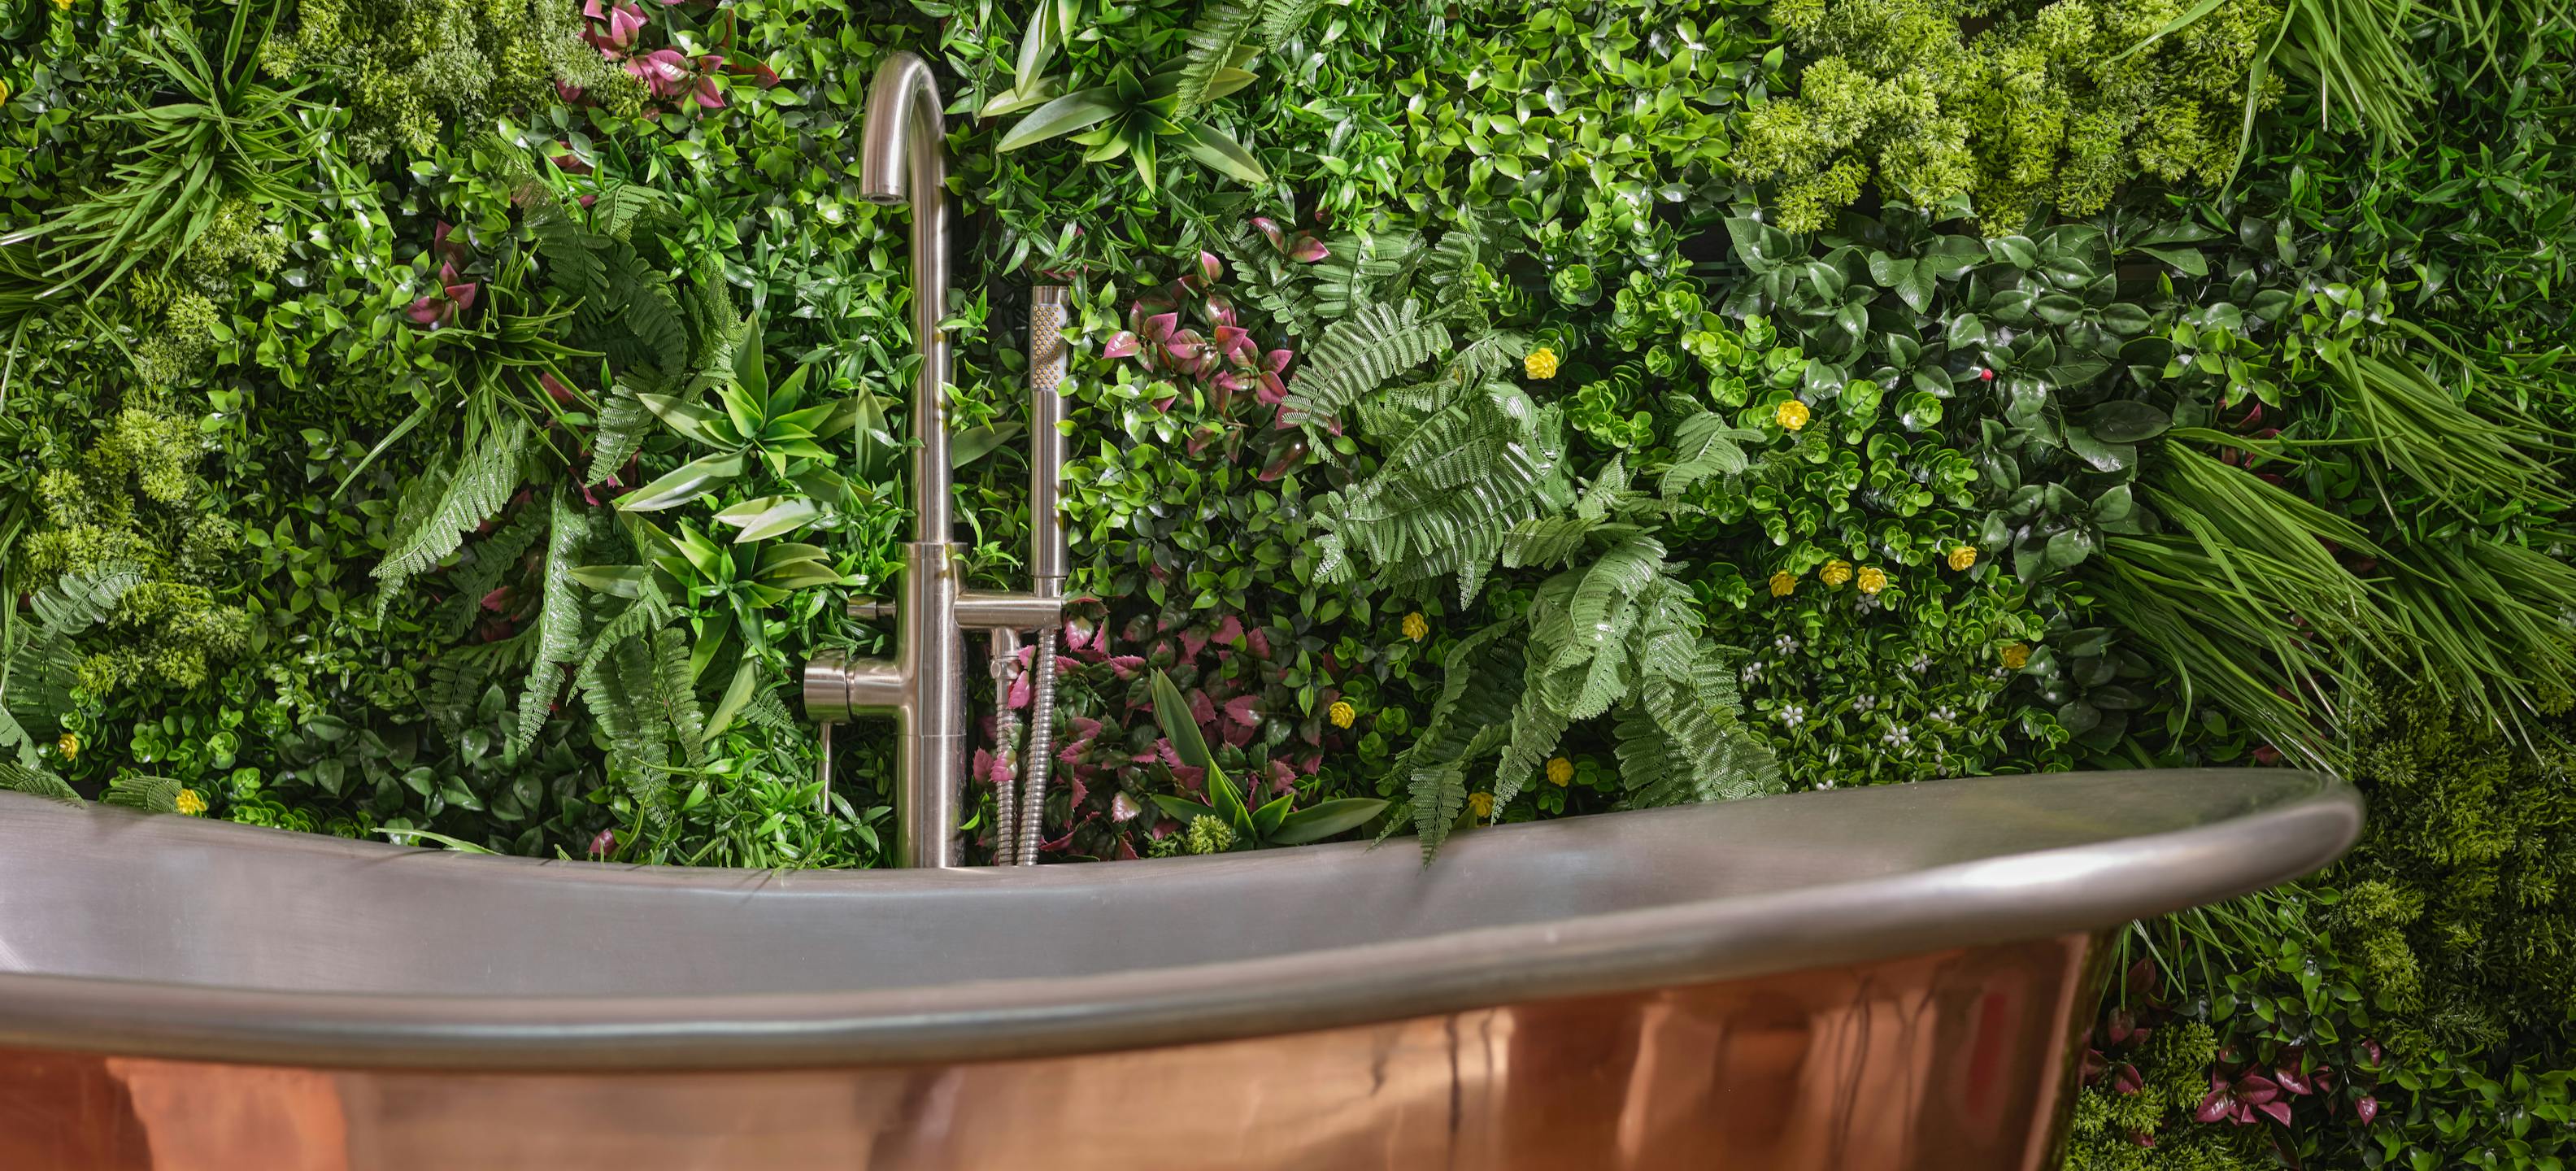 Blooming Artificial wonderland-style green wall panels behind luxury copper bath